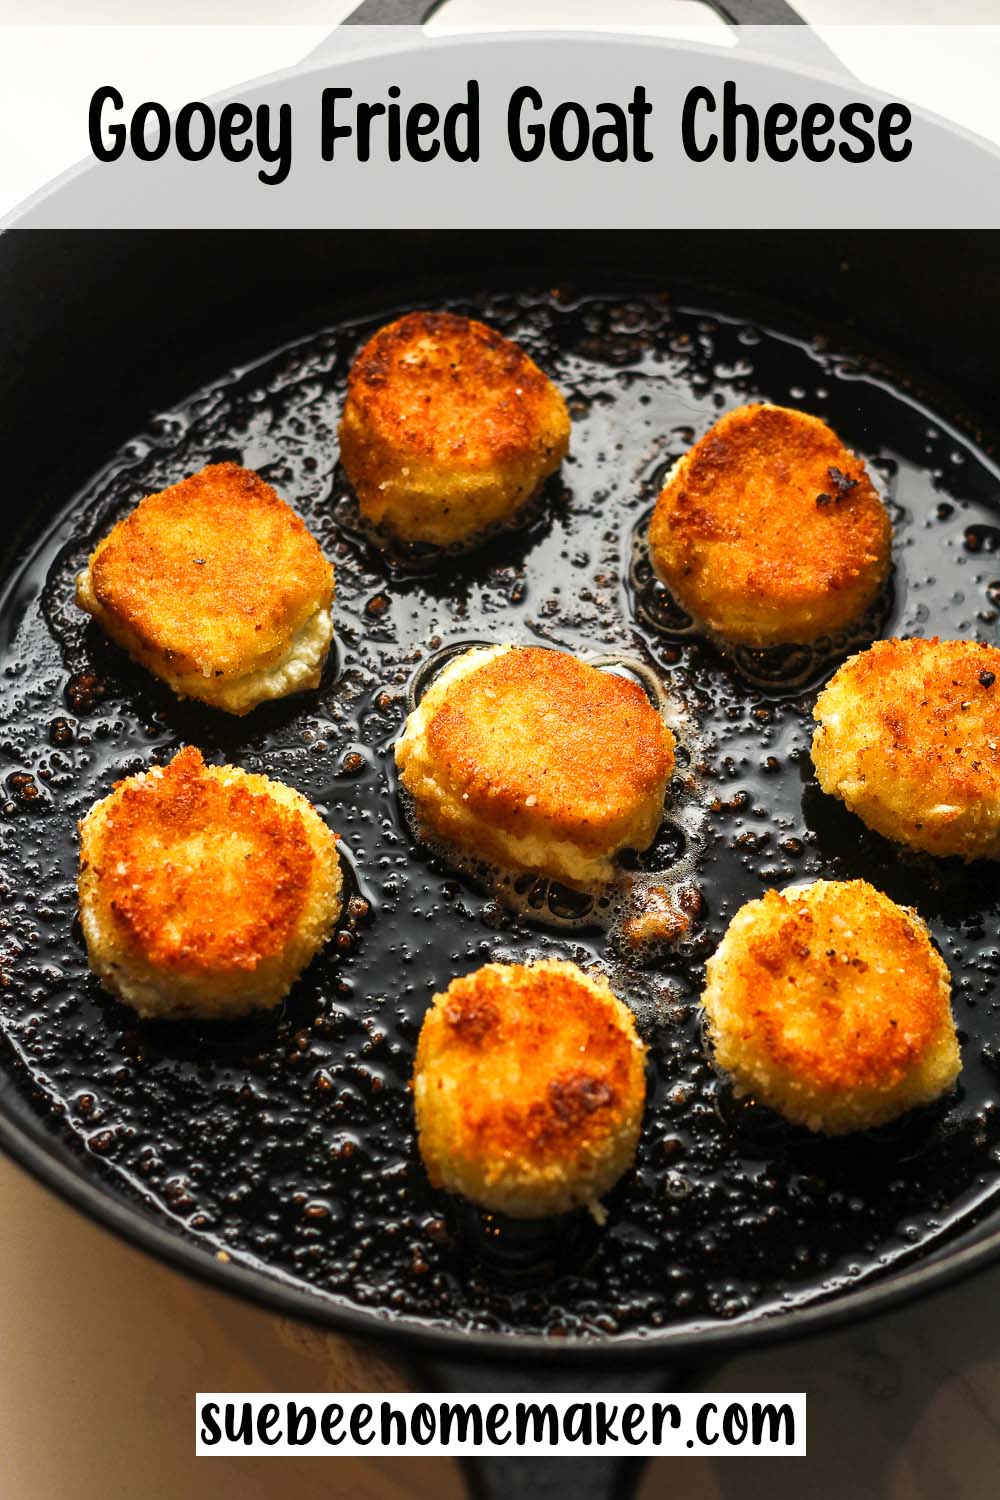 A skillet of gooey fried goat cheese.